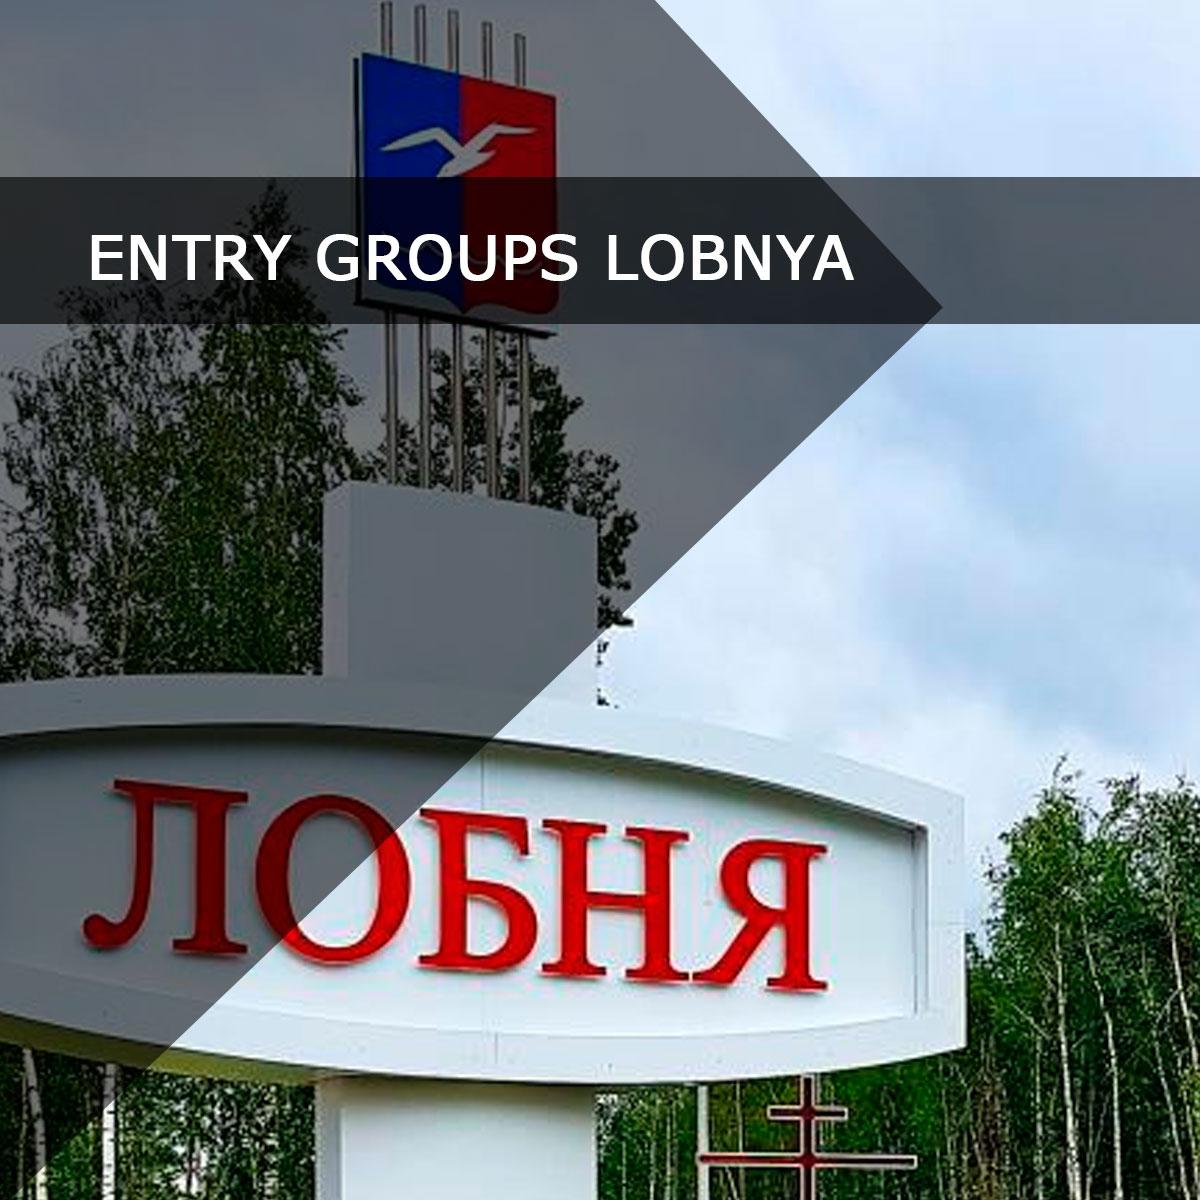 Entry groups in the city of Lobnya